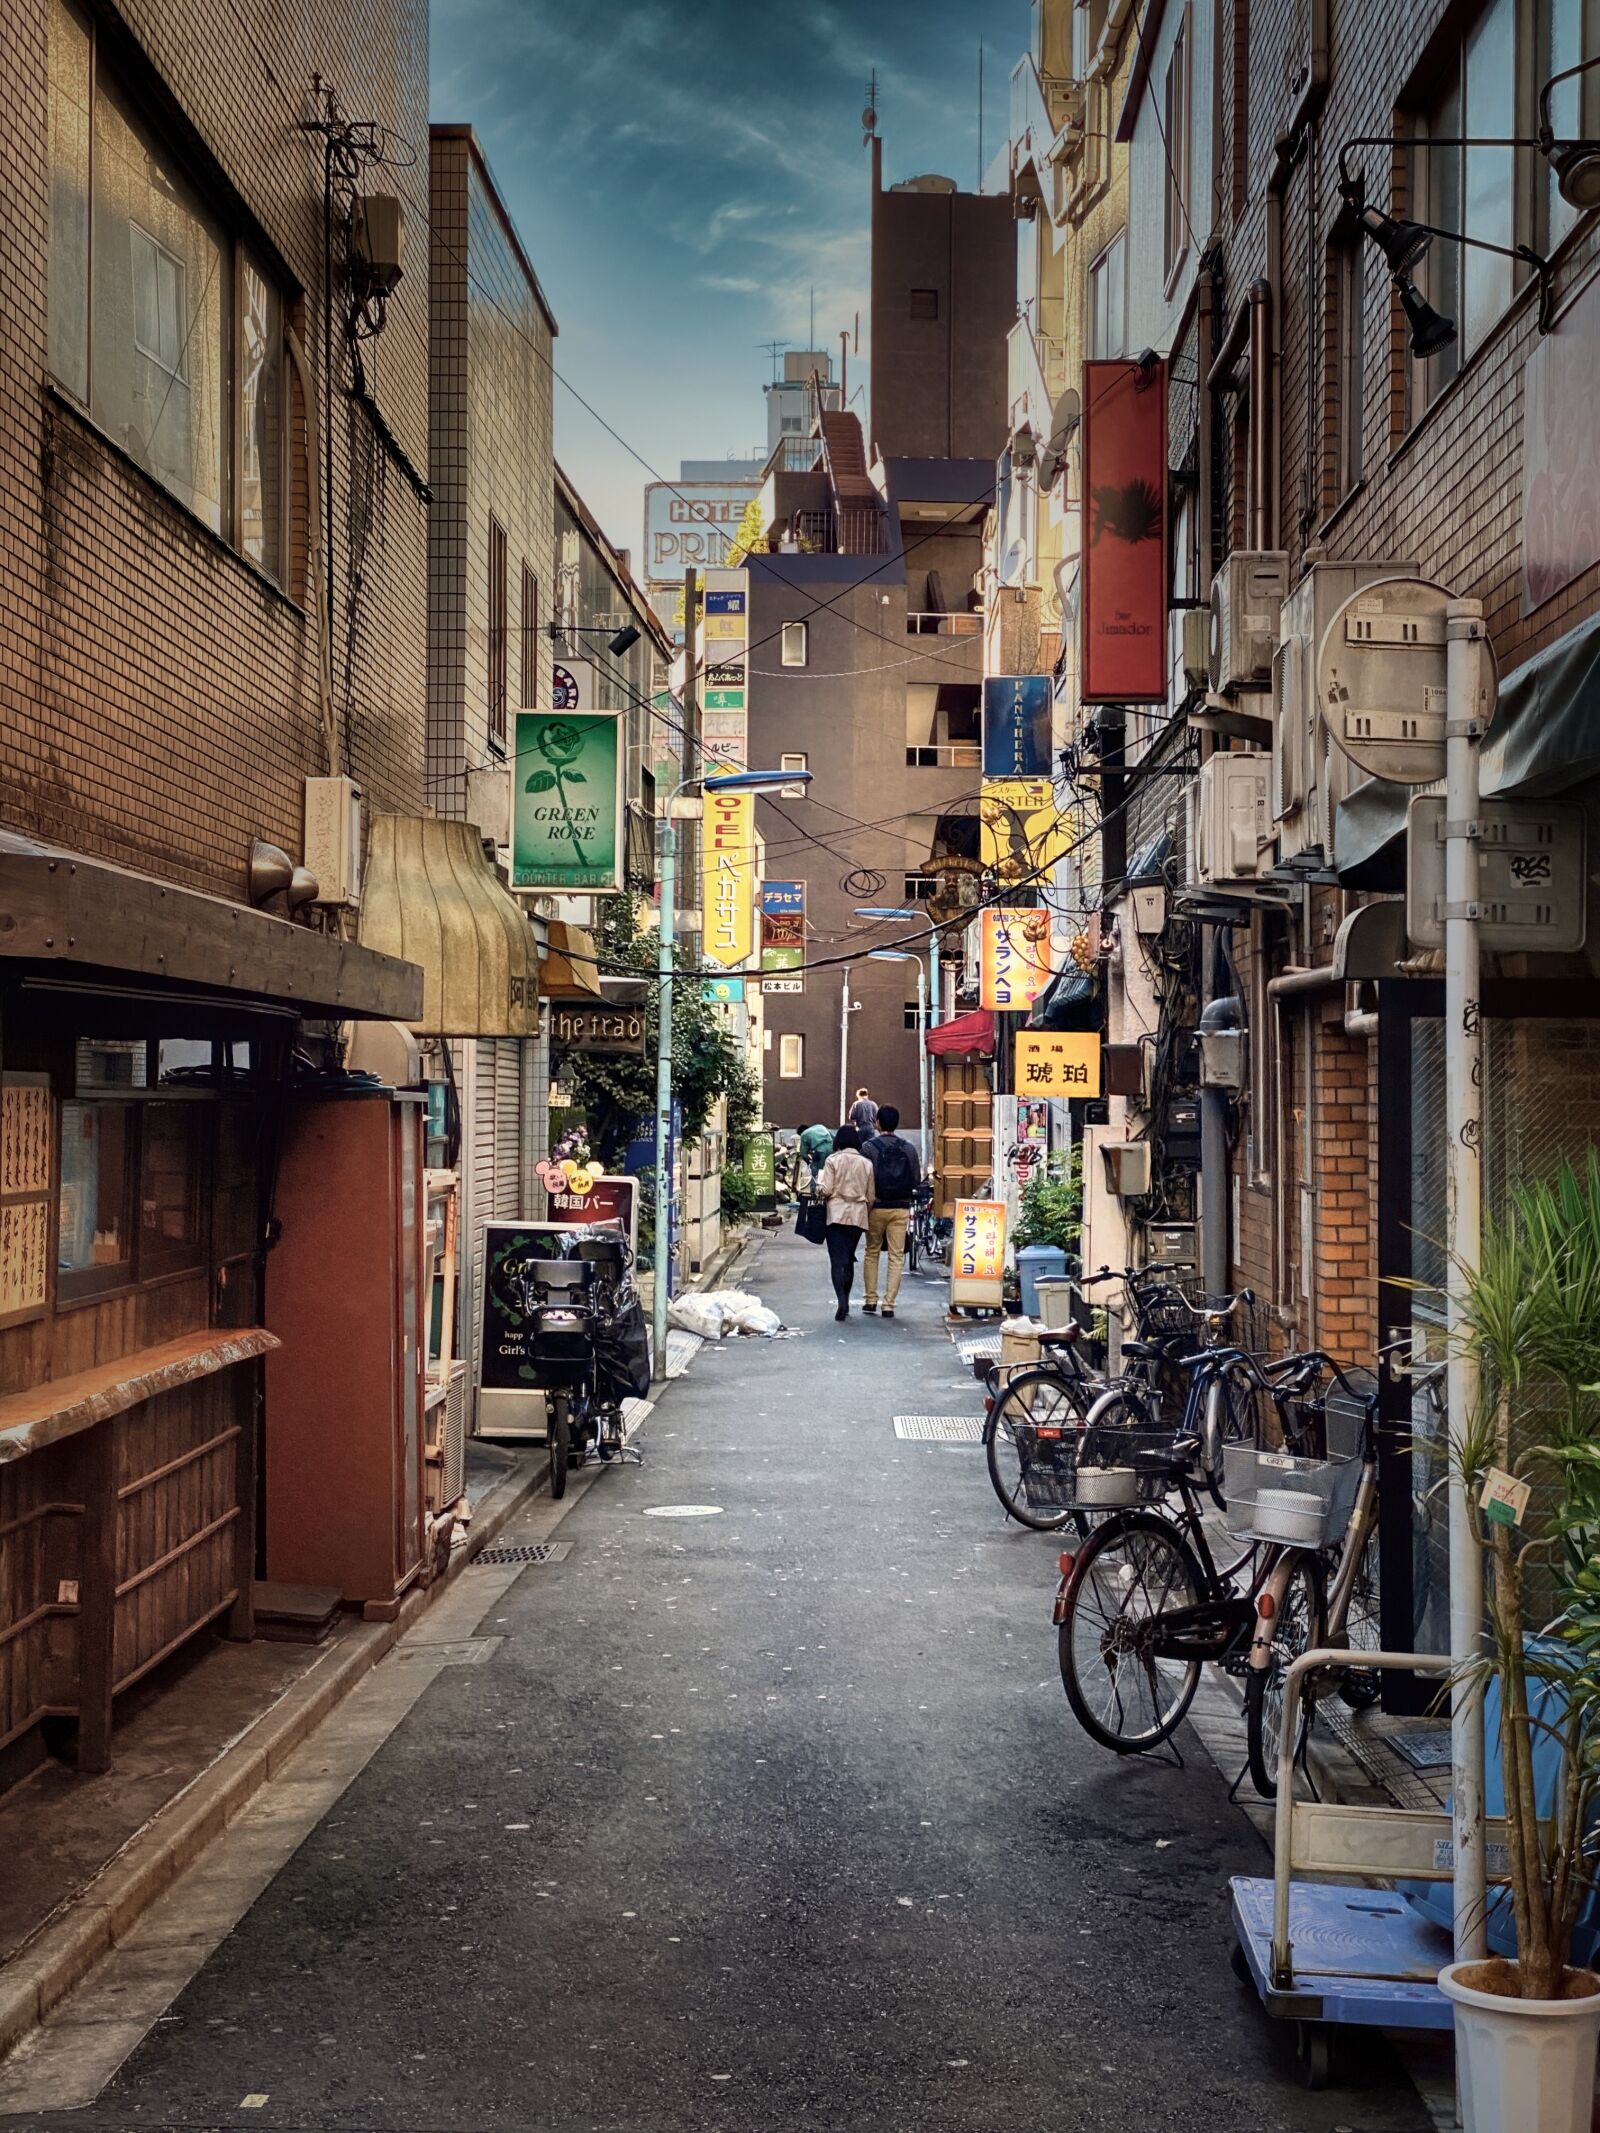 Apple iPhone 11 Pro Max + iPhone 11 Pro Max back triple camera 6mm f/2 sample photo. Alley, alleyway, anime photography